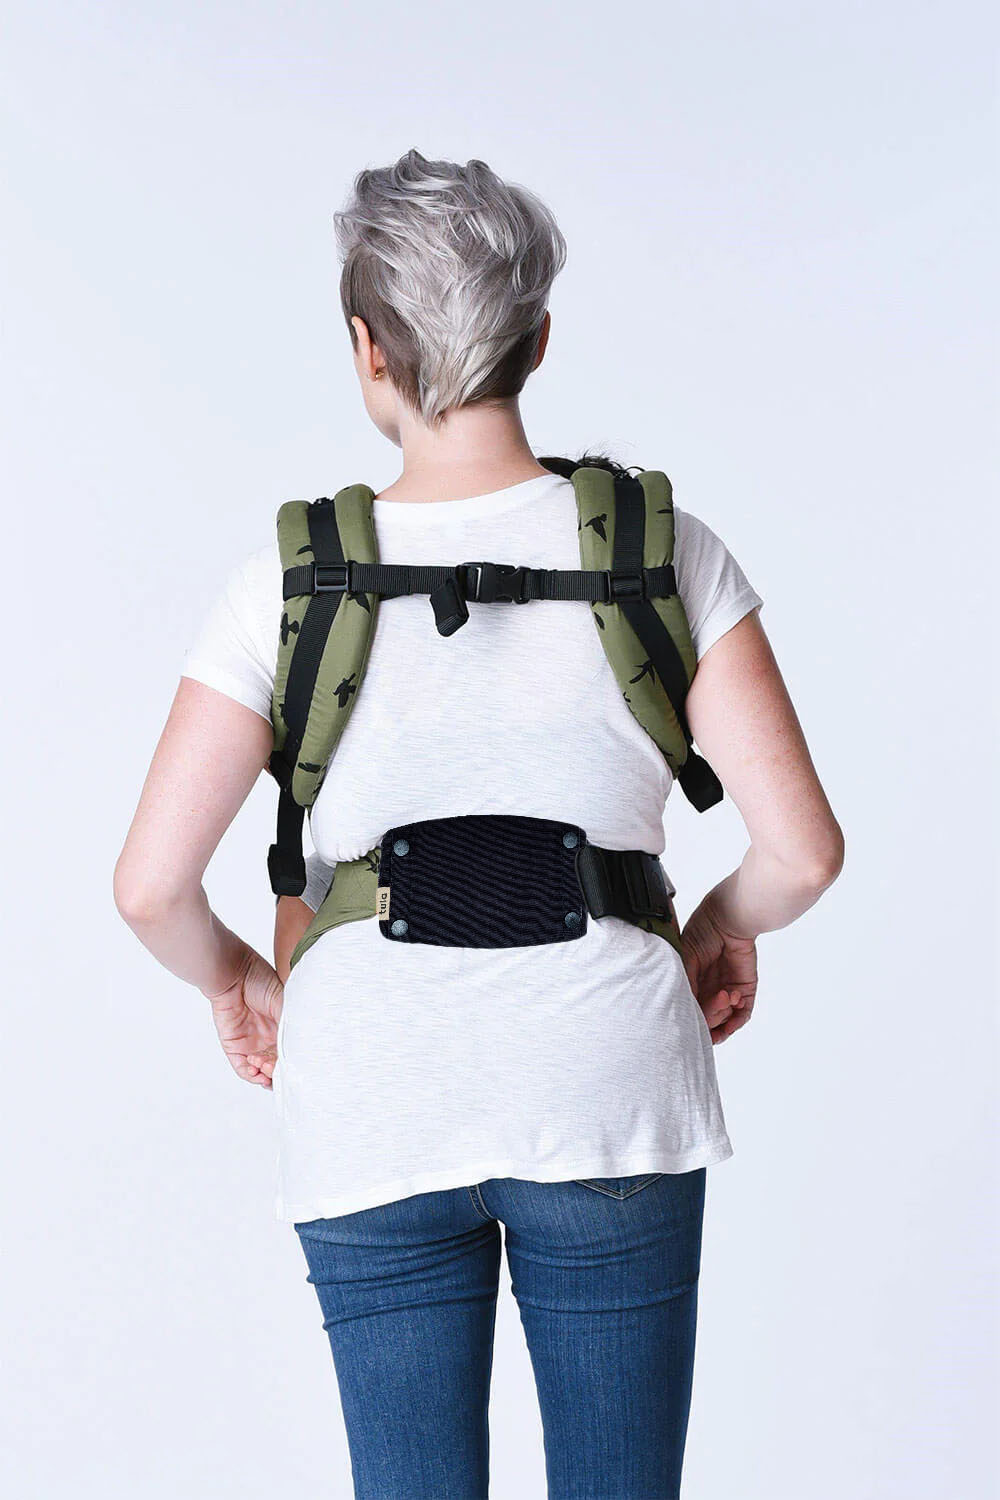 Tula Lumbar Support for Baby Carrier